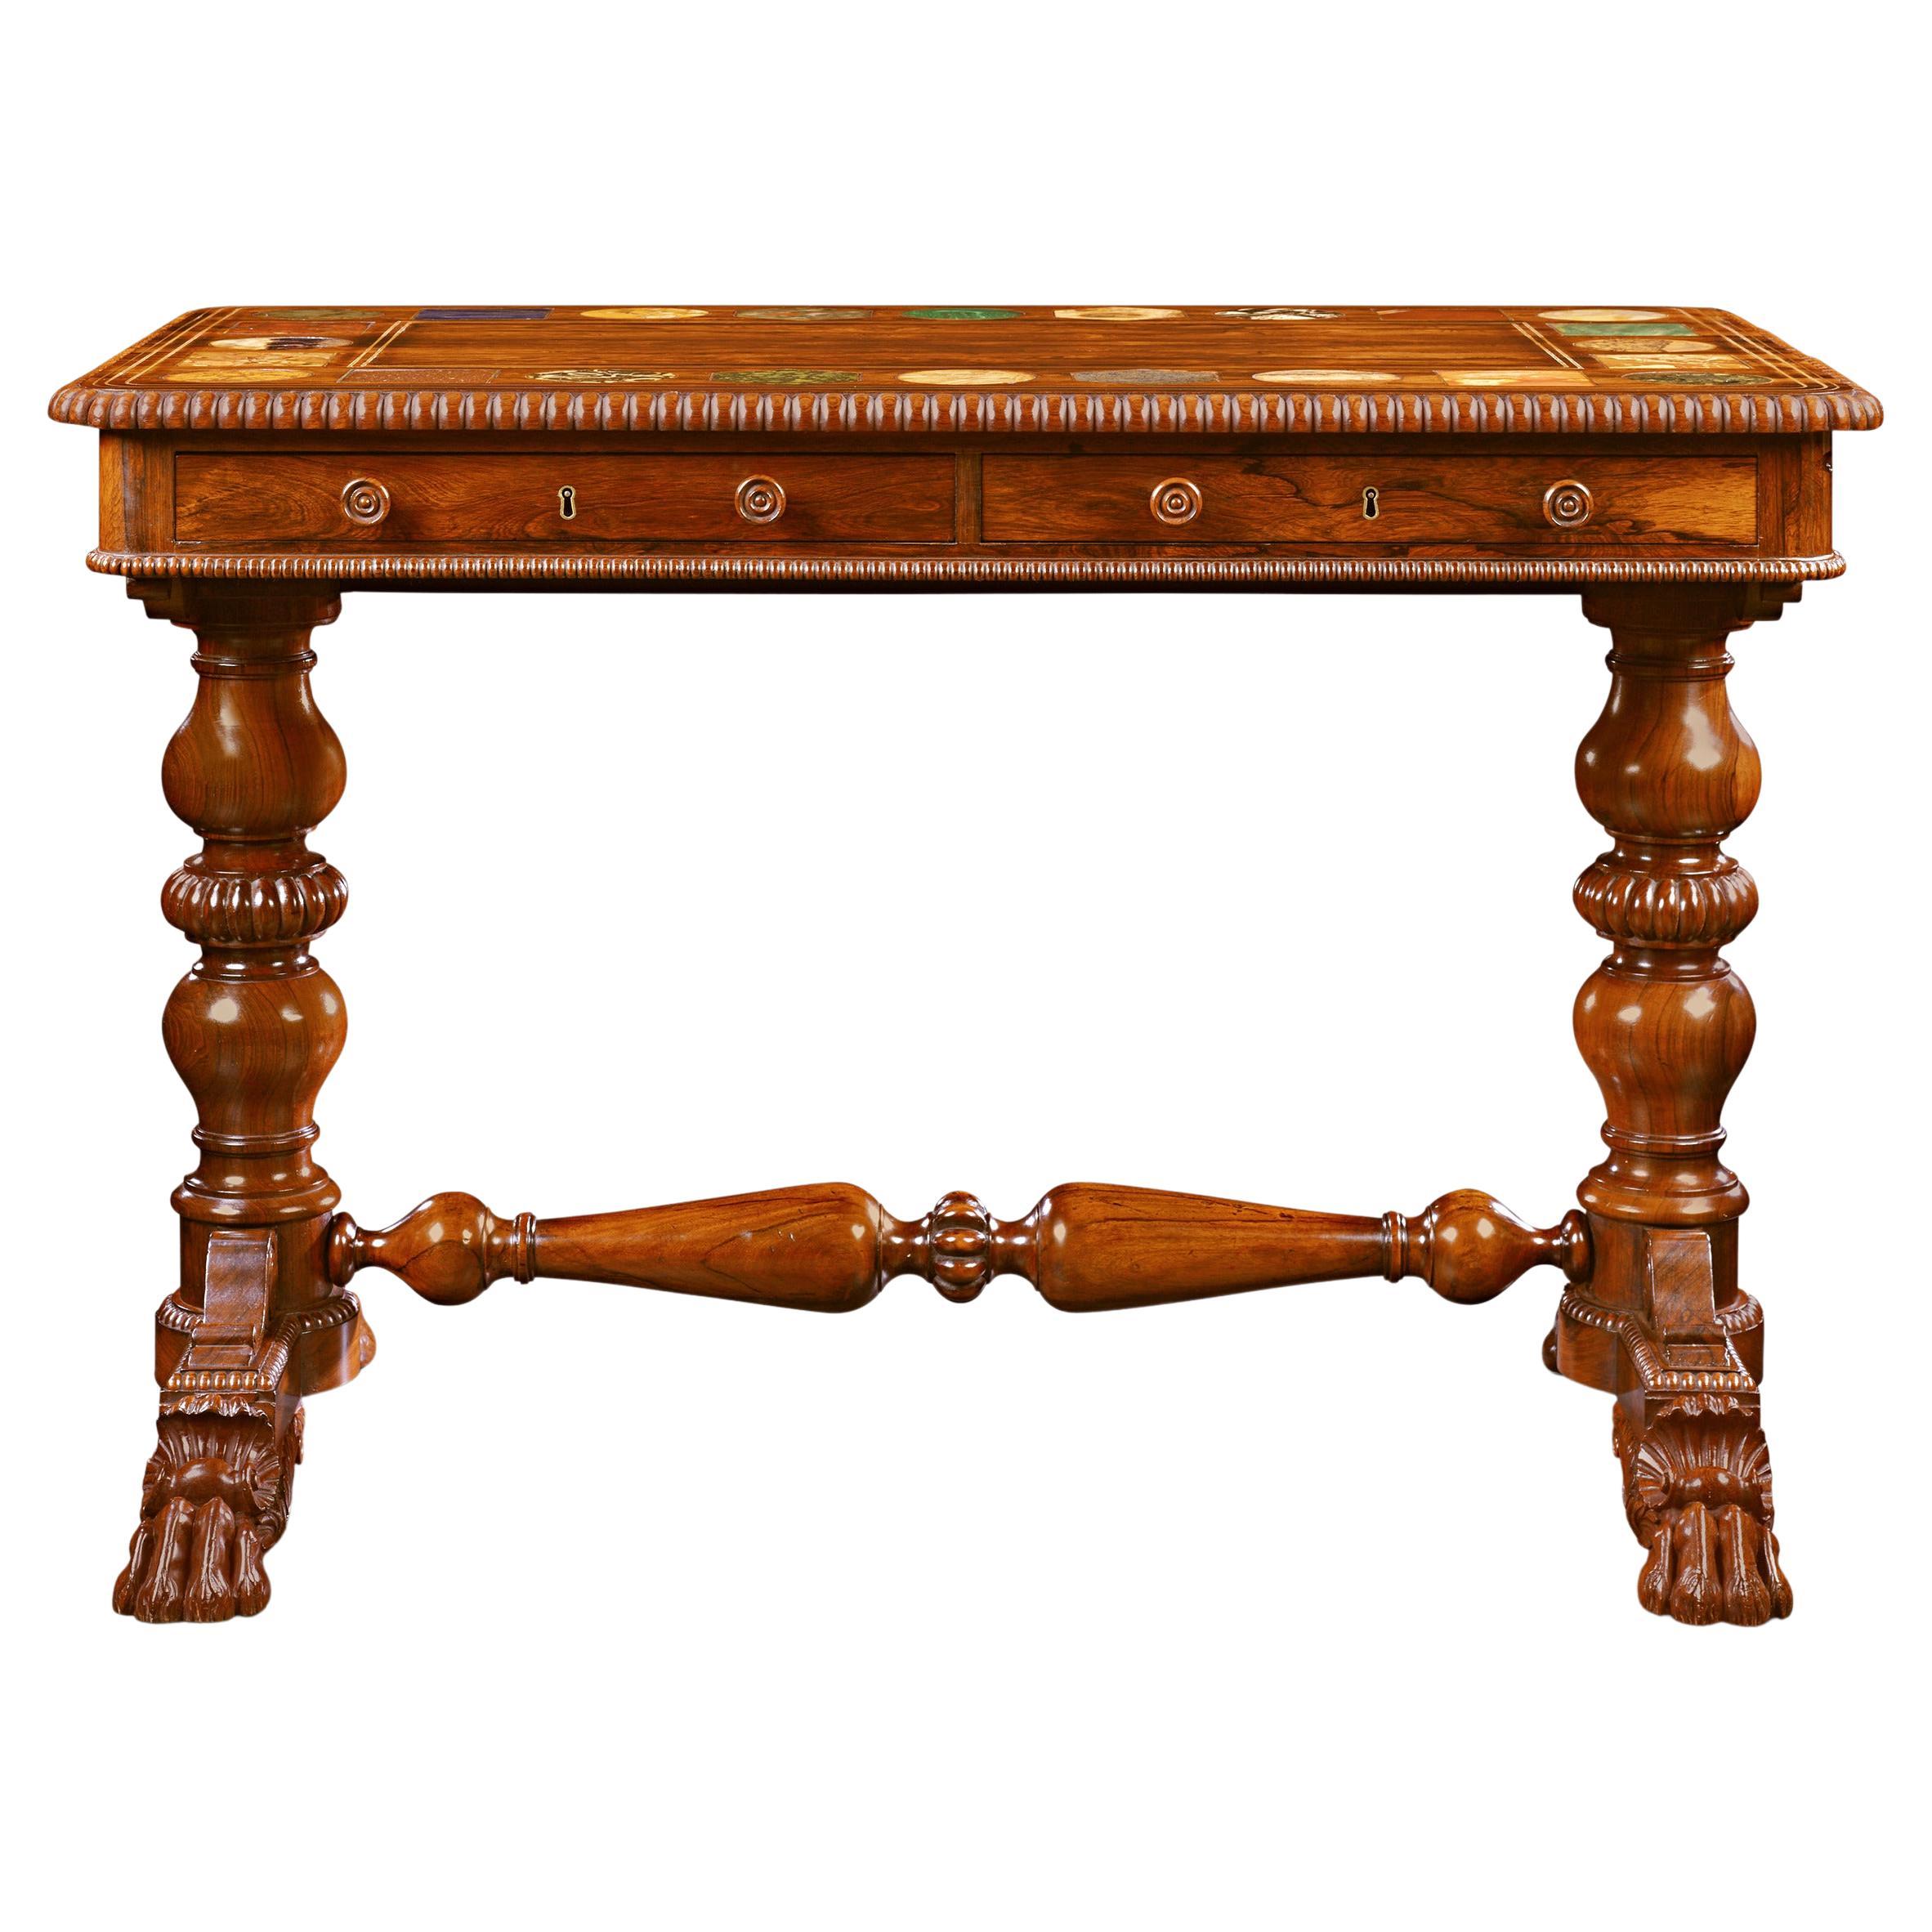 Hardstone and Rosewood Centre Table Attributed to Gillows